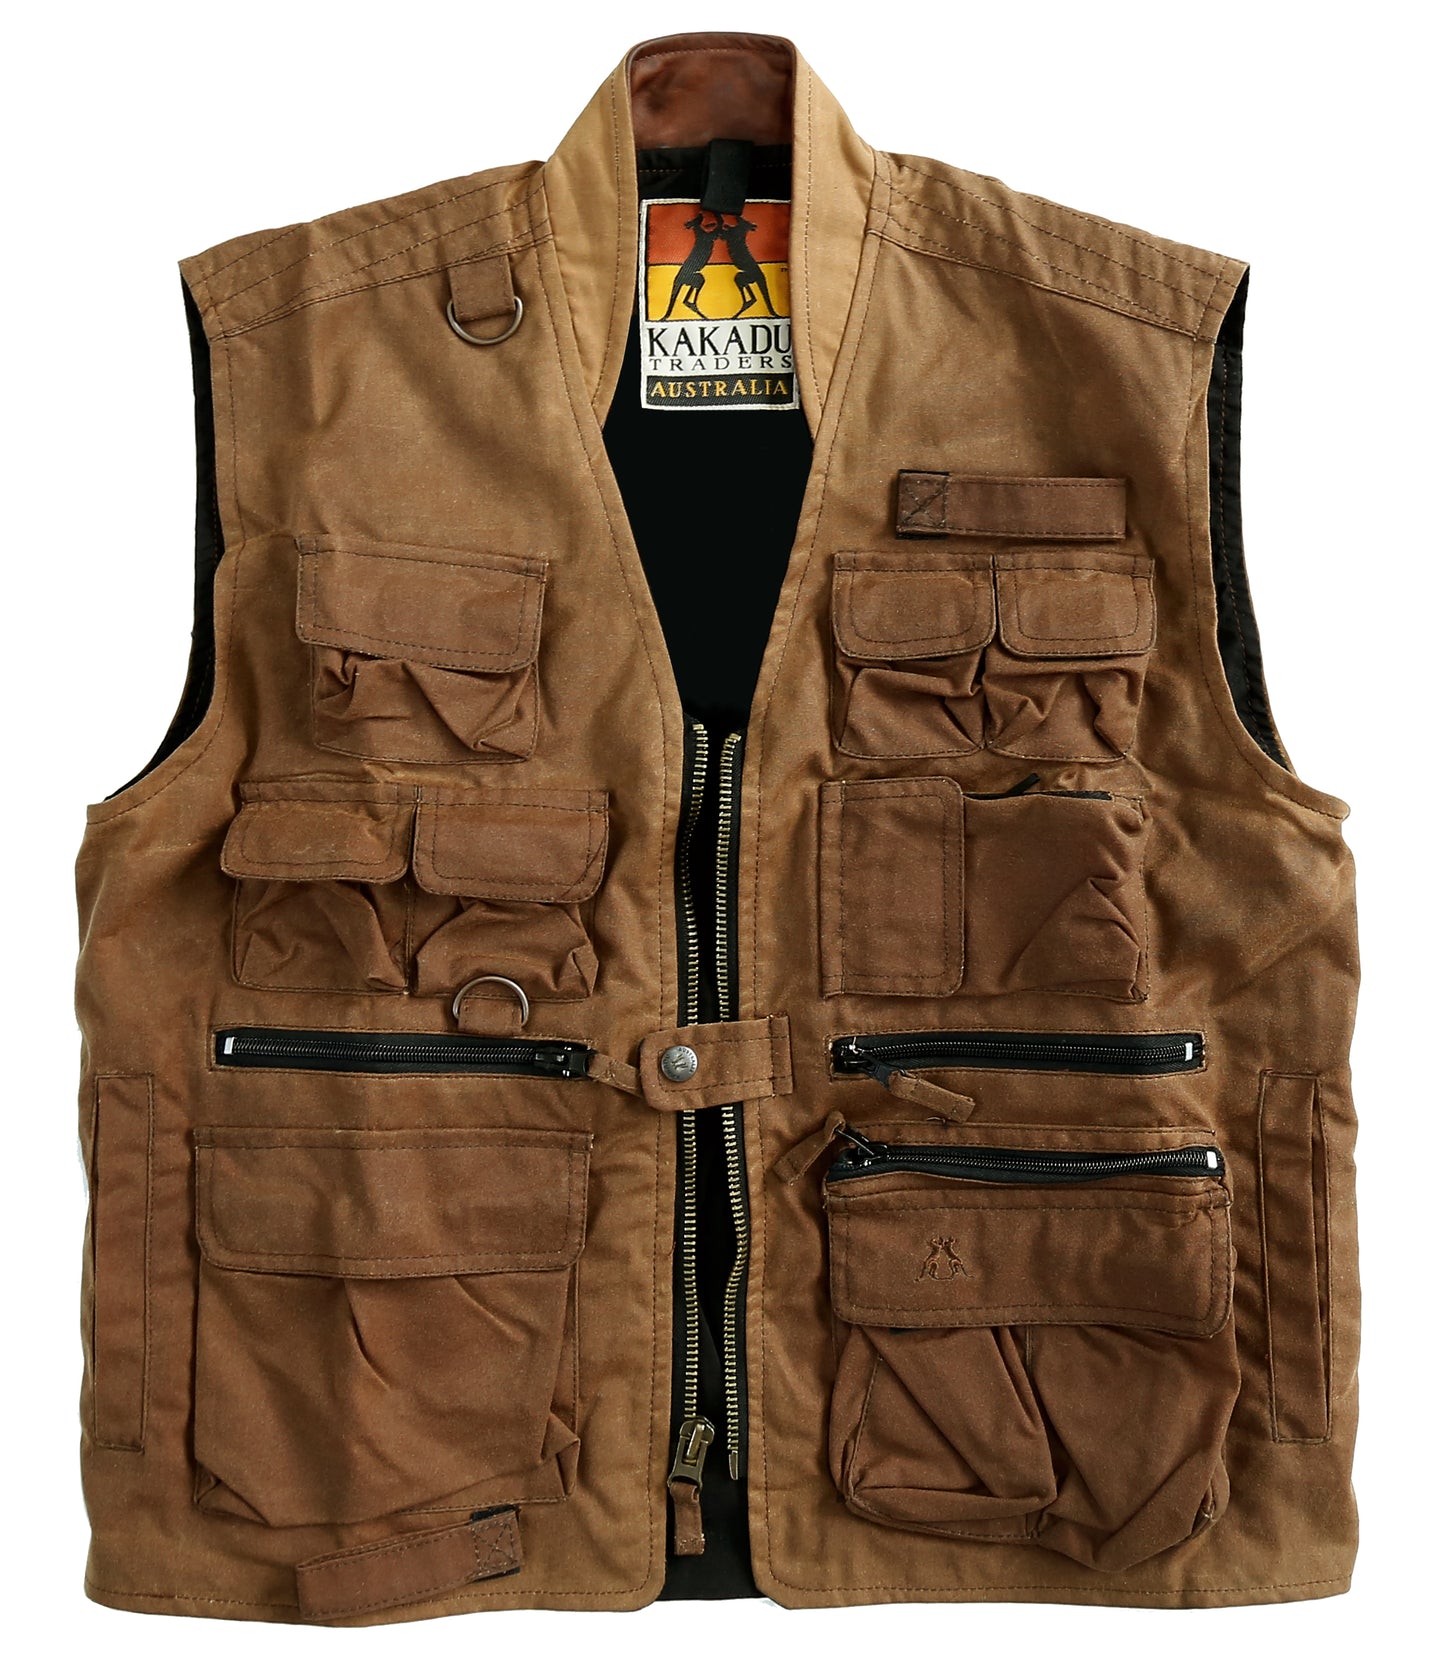 Water-repellent leisure outdoor angler vest with many bags up to 5xl | Remaining item